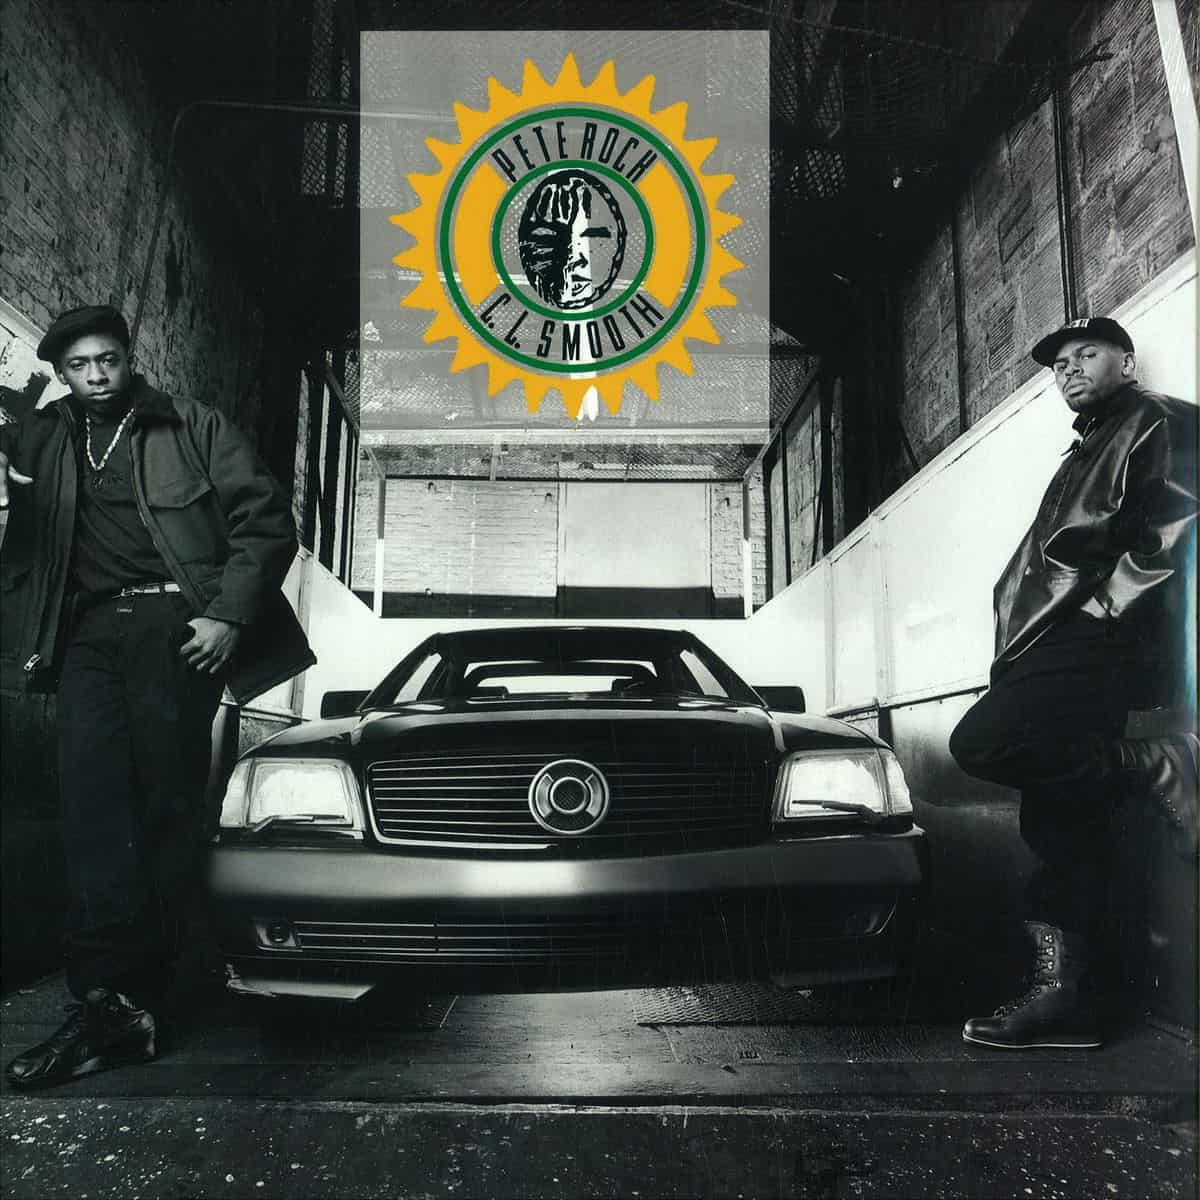 PETE ROCK & CL SMOOTH - MECCA AND THE SOUL BROTHER